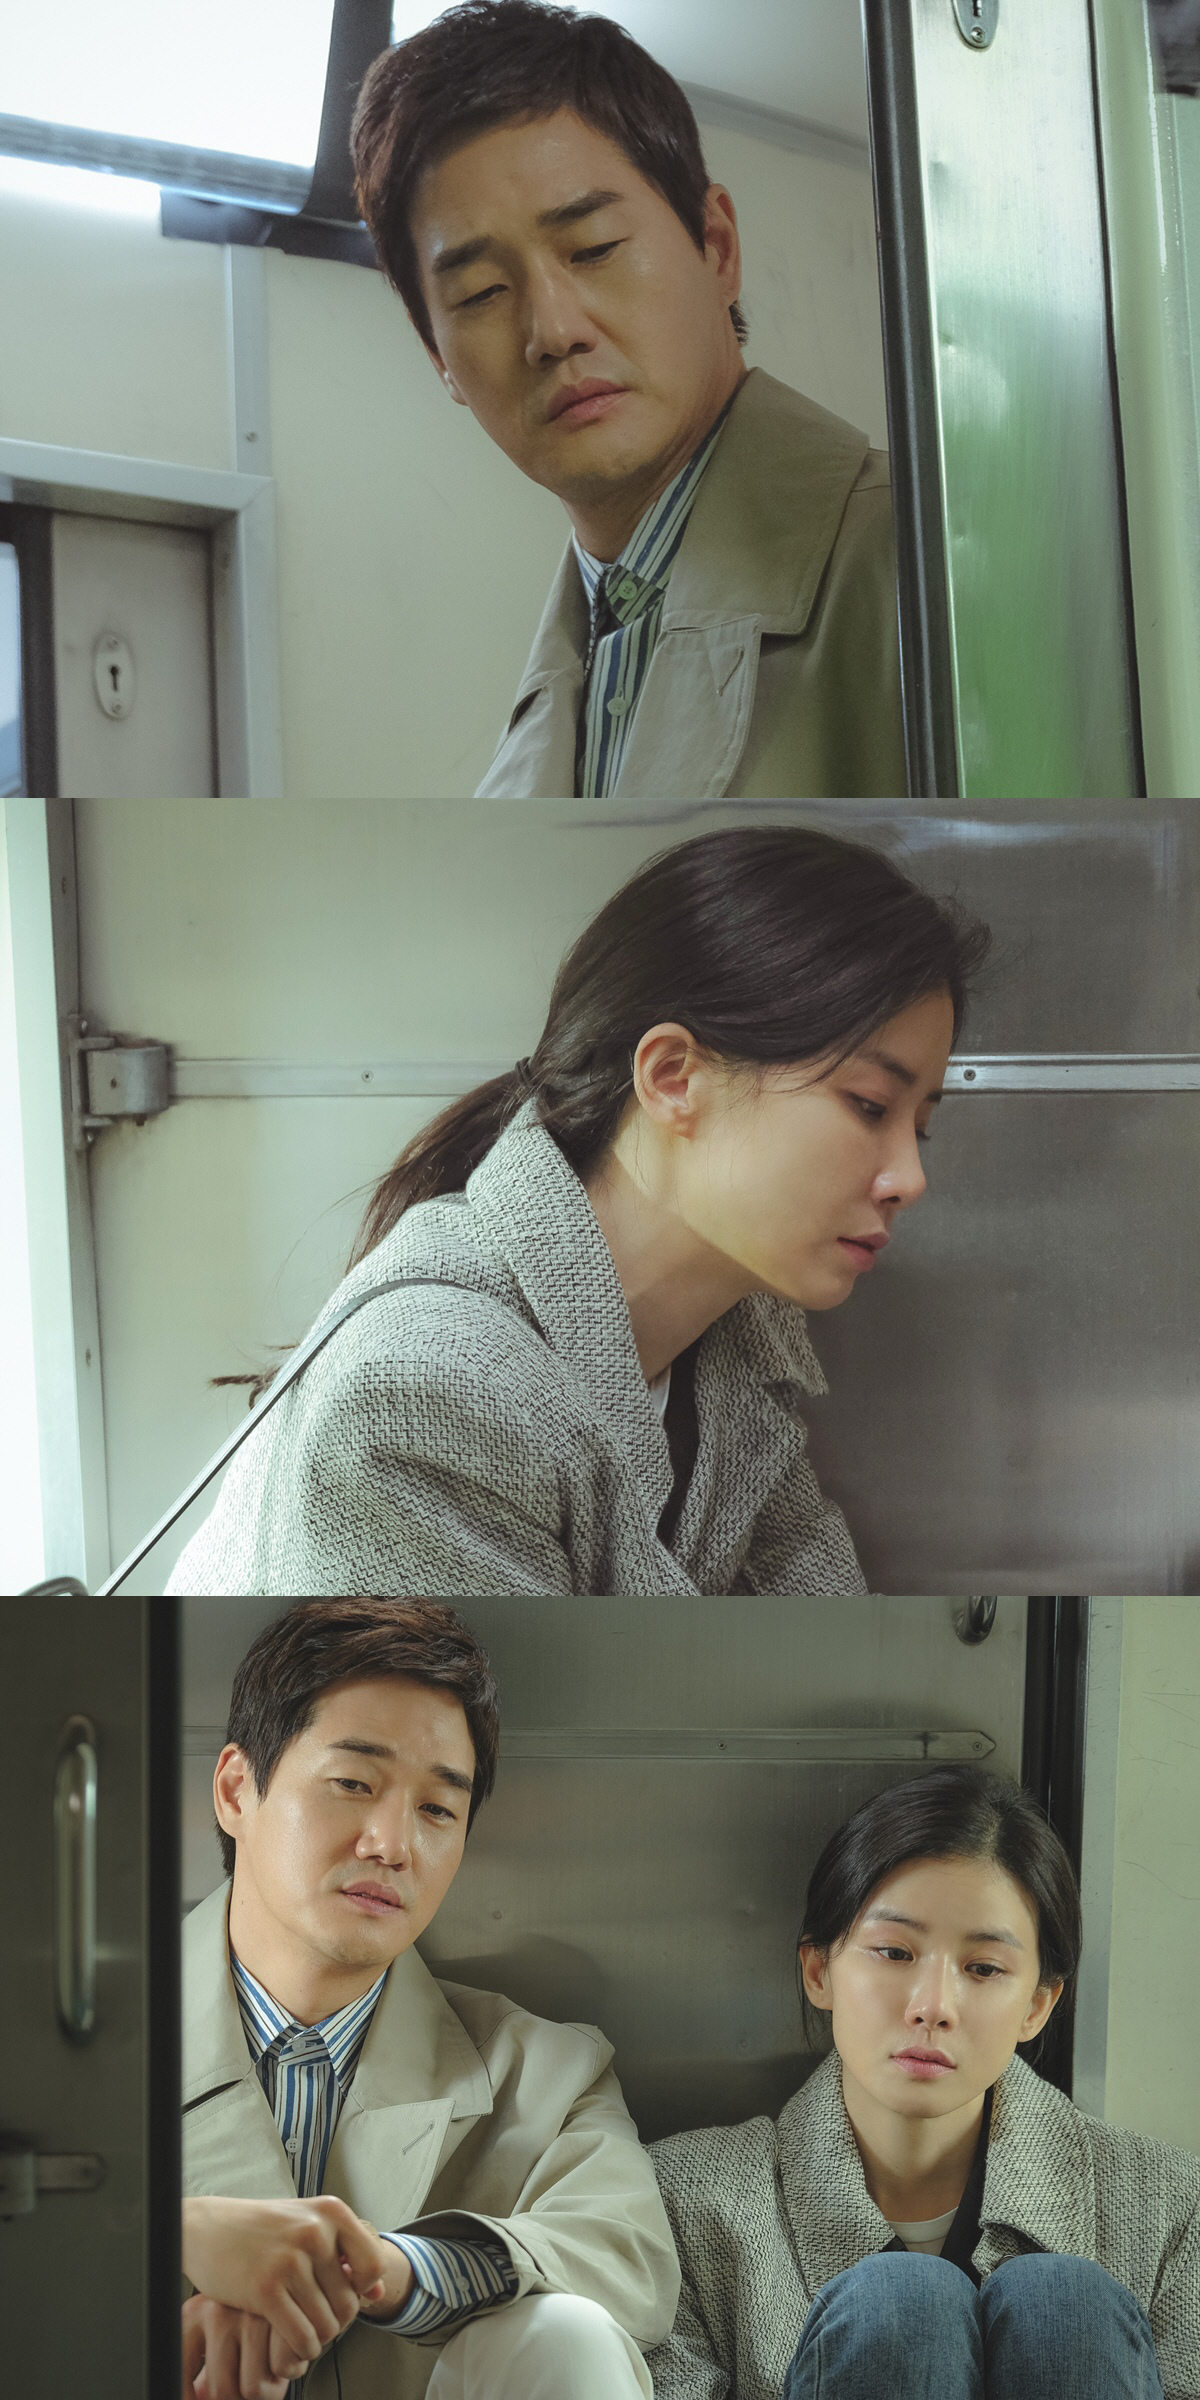 Lee Bo-young pours tears into sick Memory as he stabs ChestIn the 9th episode of TVN Toil Drama In the Mood for Love - The Moment in which Life Becomes Flower (playplayplay by Jeon Hee-young/director Son Jung-hyun/production main factory, Studio Dragon/hereinafter, In the Mood for Love), Lee Bo-young (played by Yoon Ji-su) is a young Ji-tae (played by Han Jae-jae). Still playing the role), and is obsessed with the painful memory that has haunted him for a long time.Earlier, Yoon Ji-su (Lee Bo-young) reversed his reunion with former Husband Lee Se-hoon (Kim Young-hoon), and decided to stand up to his fate.I tried to break the relationship with Han Jae-hyun (Yoo Ji-tae), but I can not easily forget the remaining feelings.They had to expect to overcome the barriers of reality and to be able to make love again.Meanwhile, Han Jae-hyun and Yoon Ji-su were caught on the train together, and Yoon Ji-su, who left the train in a painful position, was saddened.Han Jae-hyun, who watches her, also has a terrible and sad expression, so I can guess that there is an unusual story.Also, it is more curious because it contains the image of Yoon Ji-su with a devastated expression and Han Jae-hyun who comforts warmly.What is the painful memory that made Yoon Ji-su collapse, and whether he can overcome the pain of the years he has had for a long time can be confirmed in the 9th TVN Saturday Drama In the Mood for Love - The moment when life becomes a flower which will be broadcasted at 9 pm tomorrow (23rd).